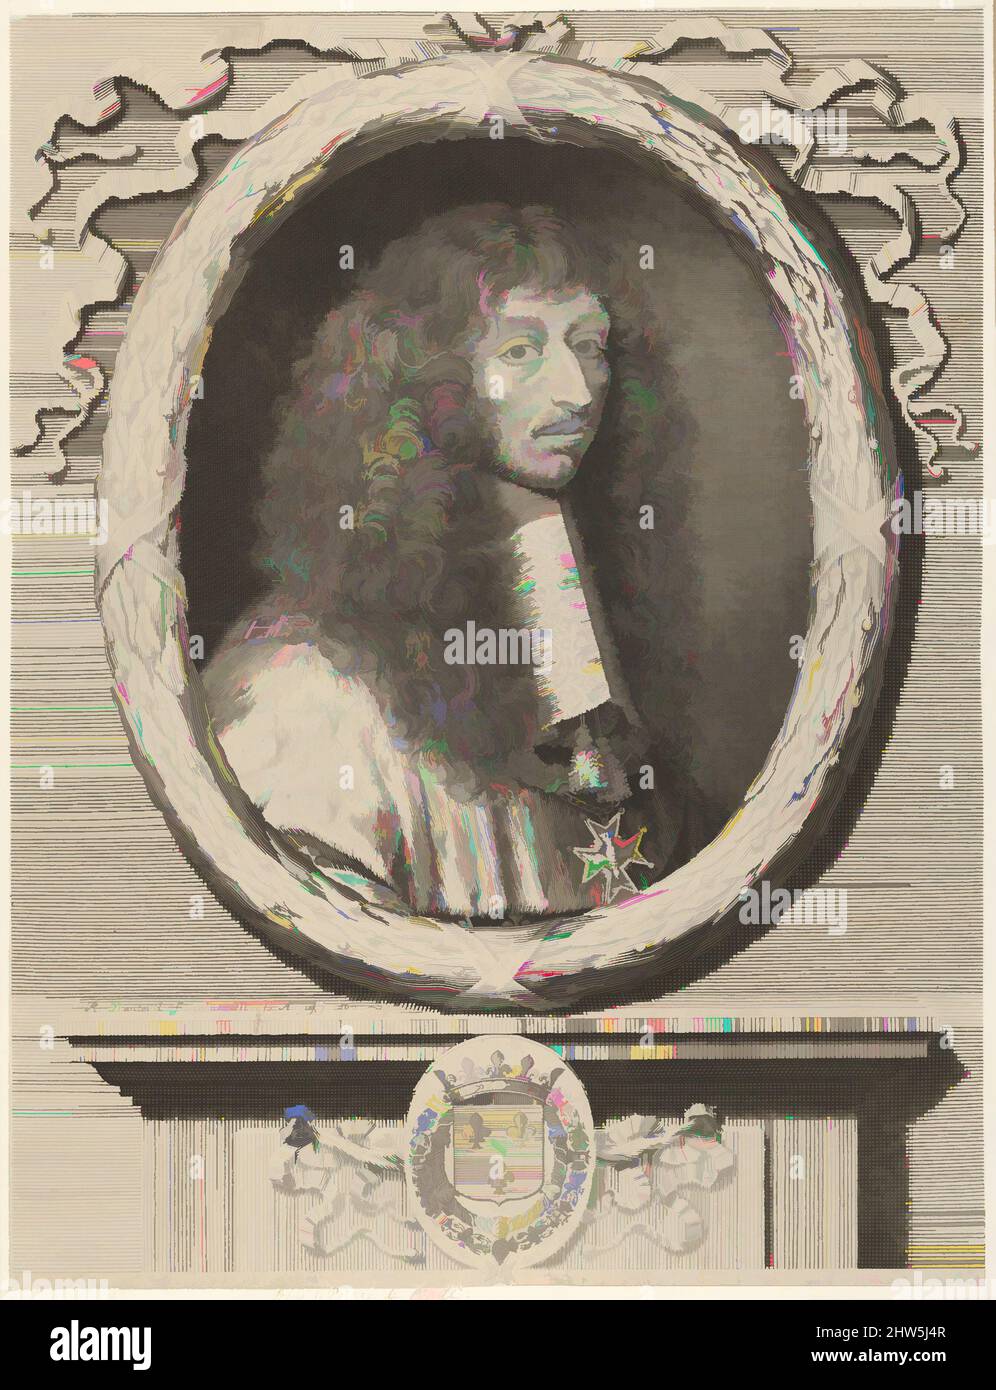 Art inspired by Louis II de Bourbon, Prince de Condé, 1662, Engraving; second state of three (Petitjean & Wickert), Sheet: 13 7/8 × 10 5/8 in. (35.2 × 27 cm), Prints, Robert Nanteuil (French, Reims 1623–1678 Paris, Classic works modernized by Artotop with a splash of modernity. Shapes, color and value, eye-catching visual impact on art. Emotions through freedom of artworks in a contemporary way. A timeless message pursuing a wildly creative new direction. Artists turning to the digital medium and creating the Artotop NFT Stock Photo